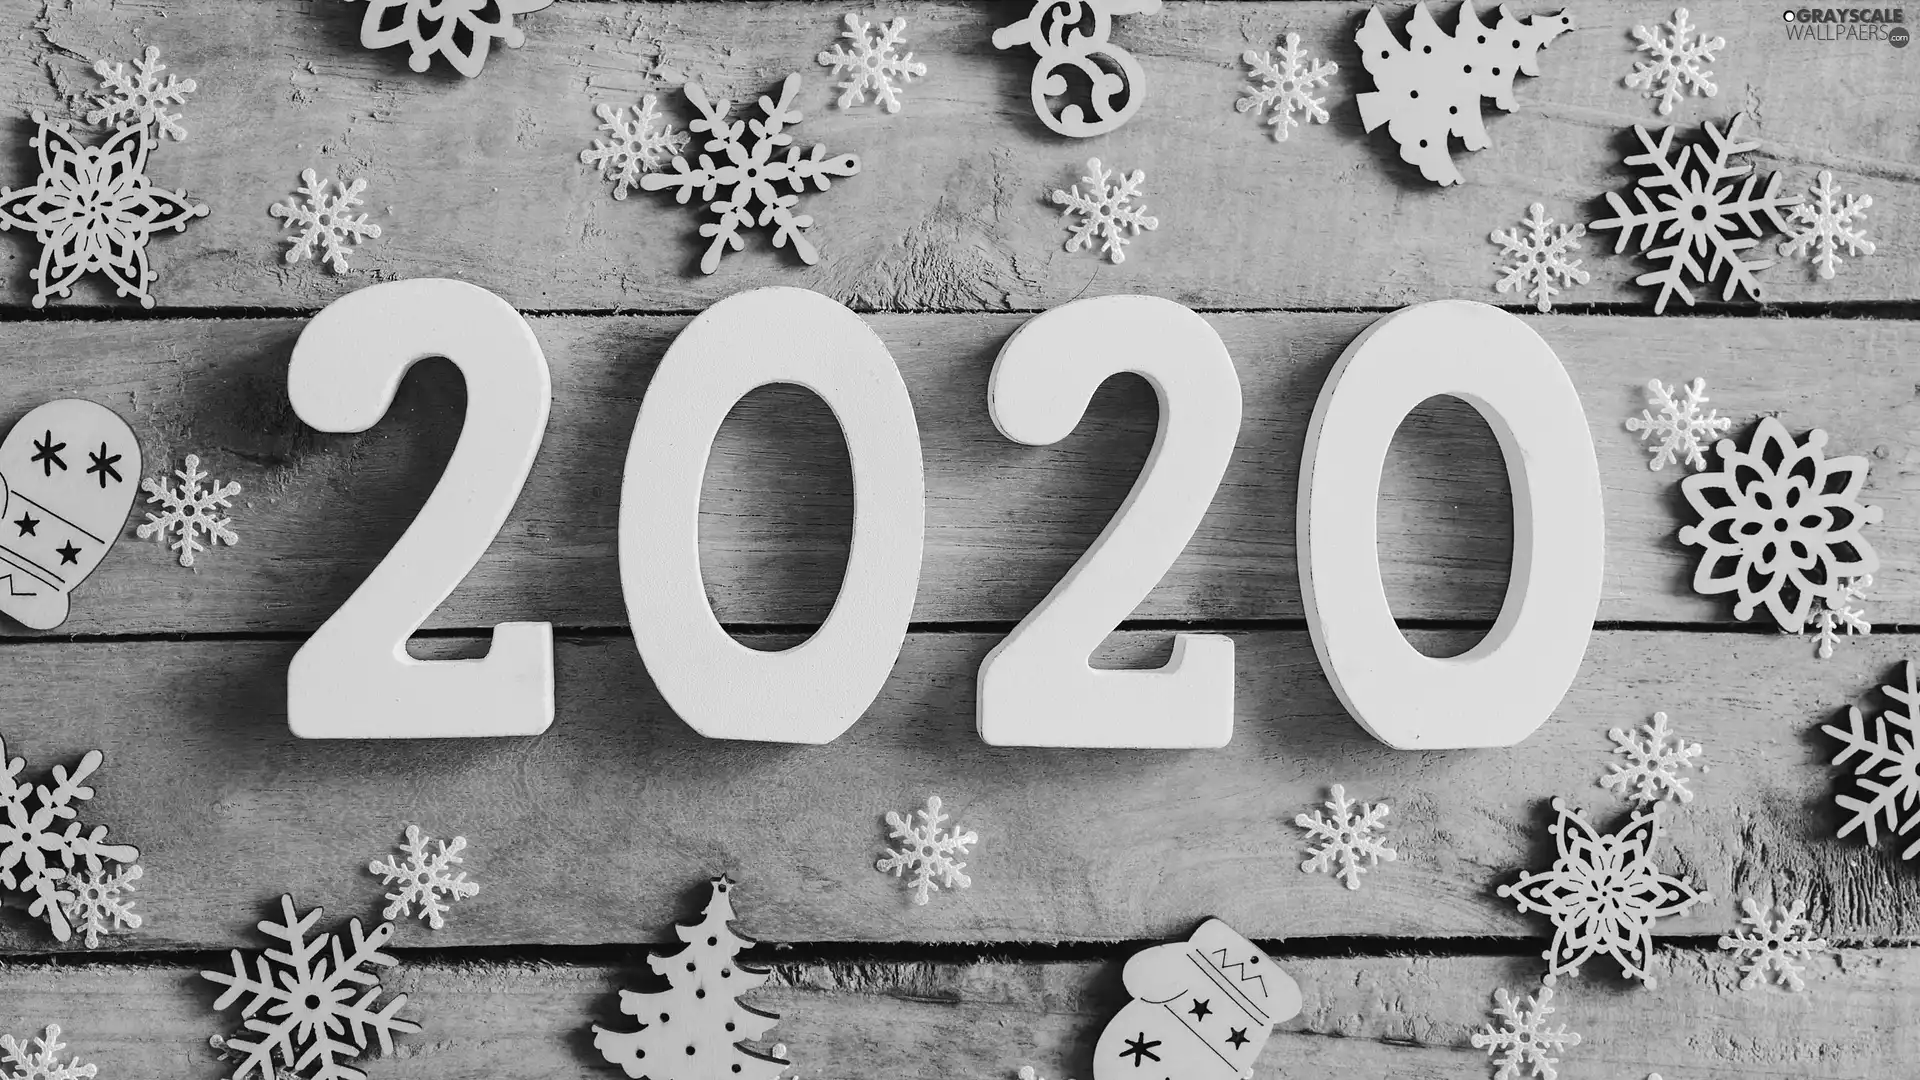 Snow White, numbers, ornamentation, 2020, New Year, Christmas, boarding